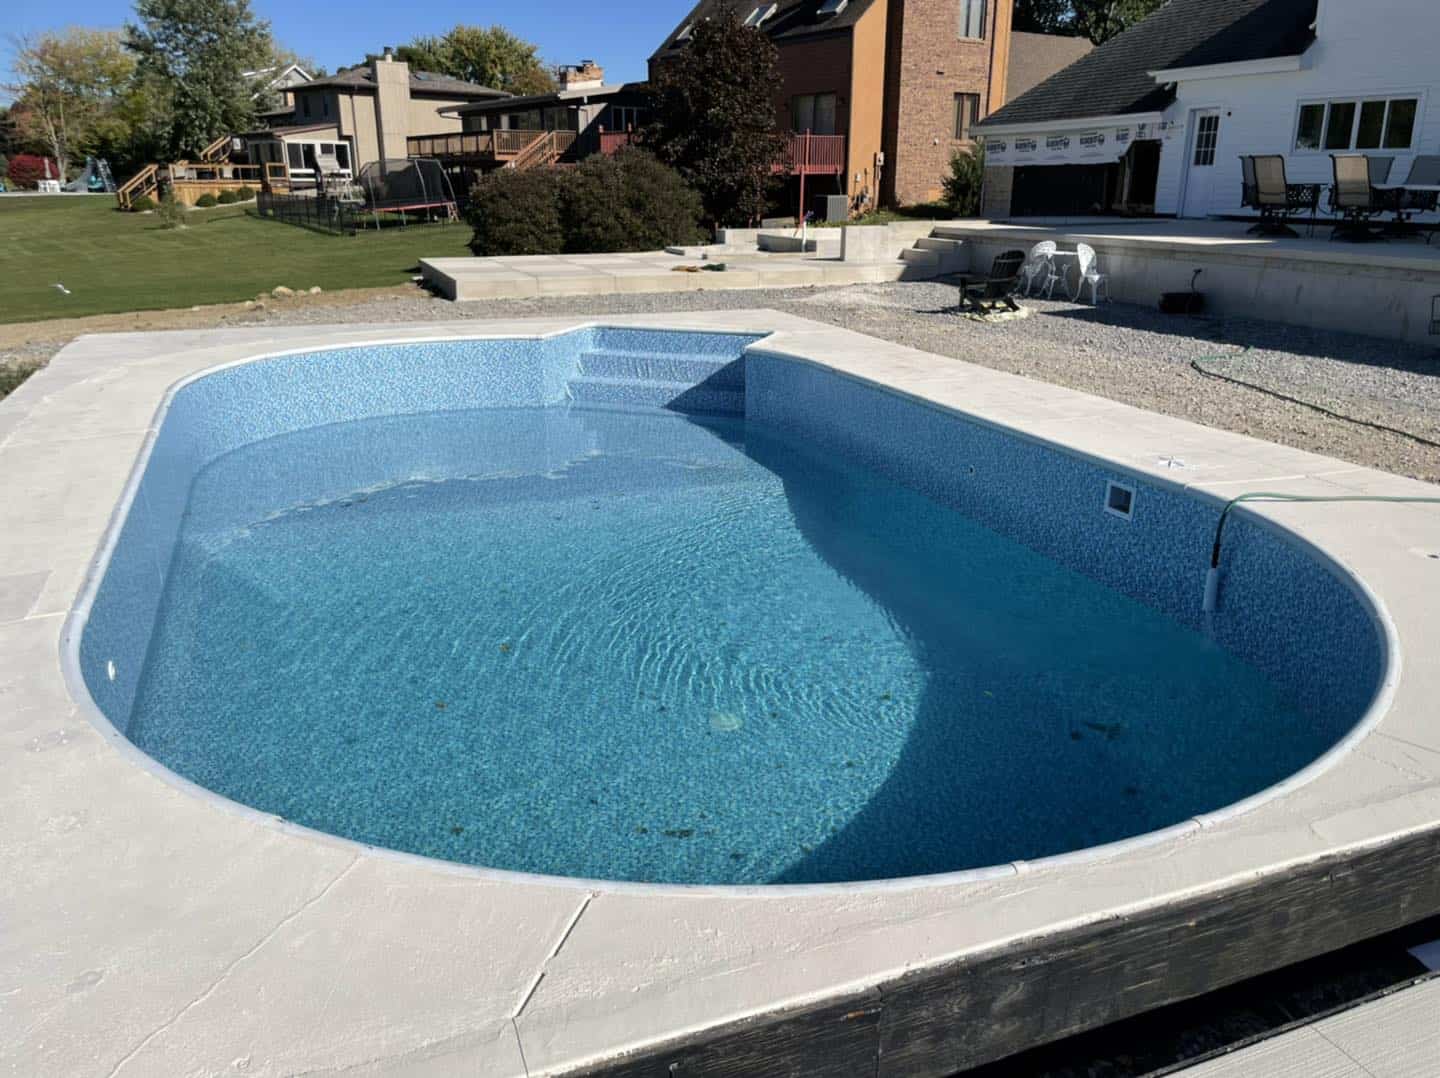 A swimming pool that has been installed in a backyard.